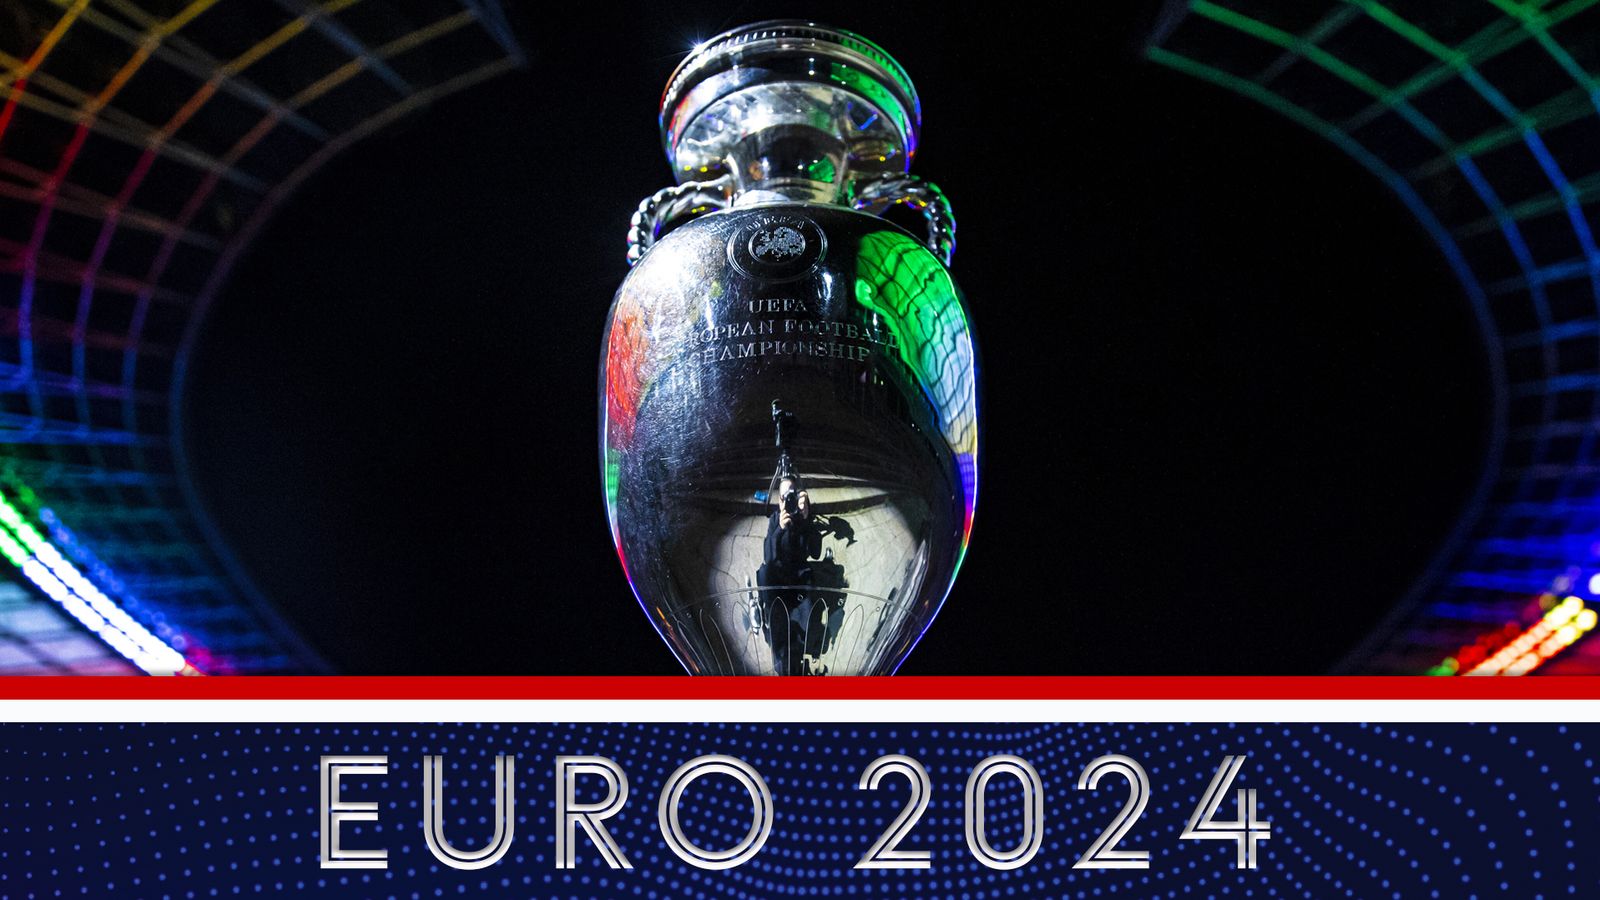 Euro 2024 knockouts: Quarter-final games and schedule